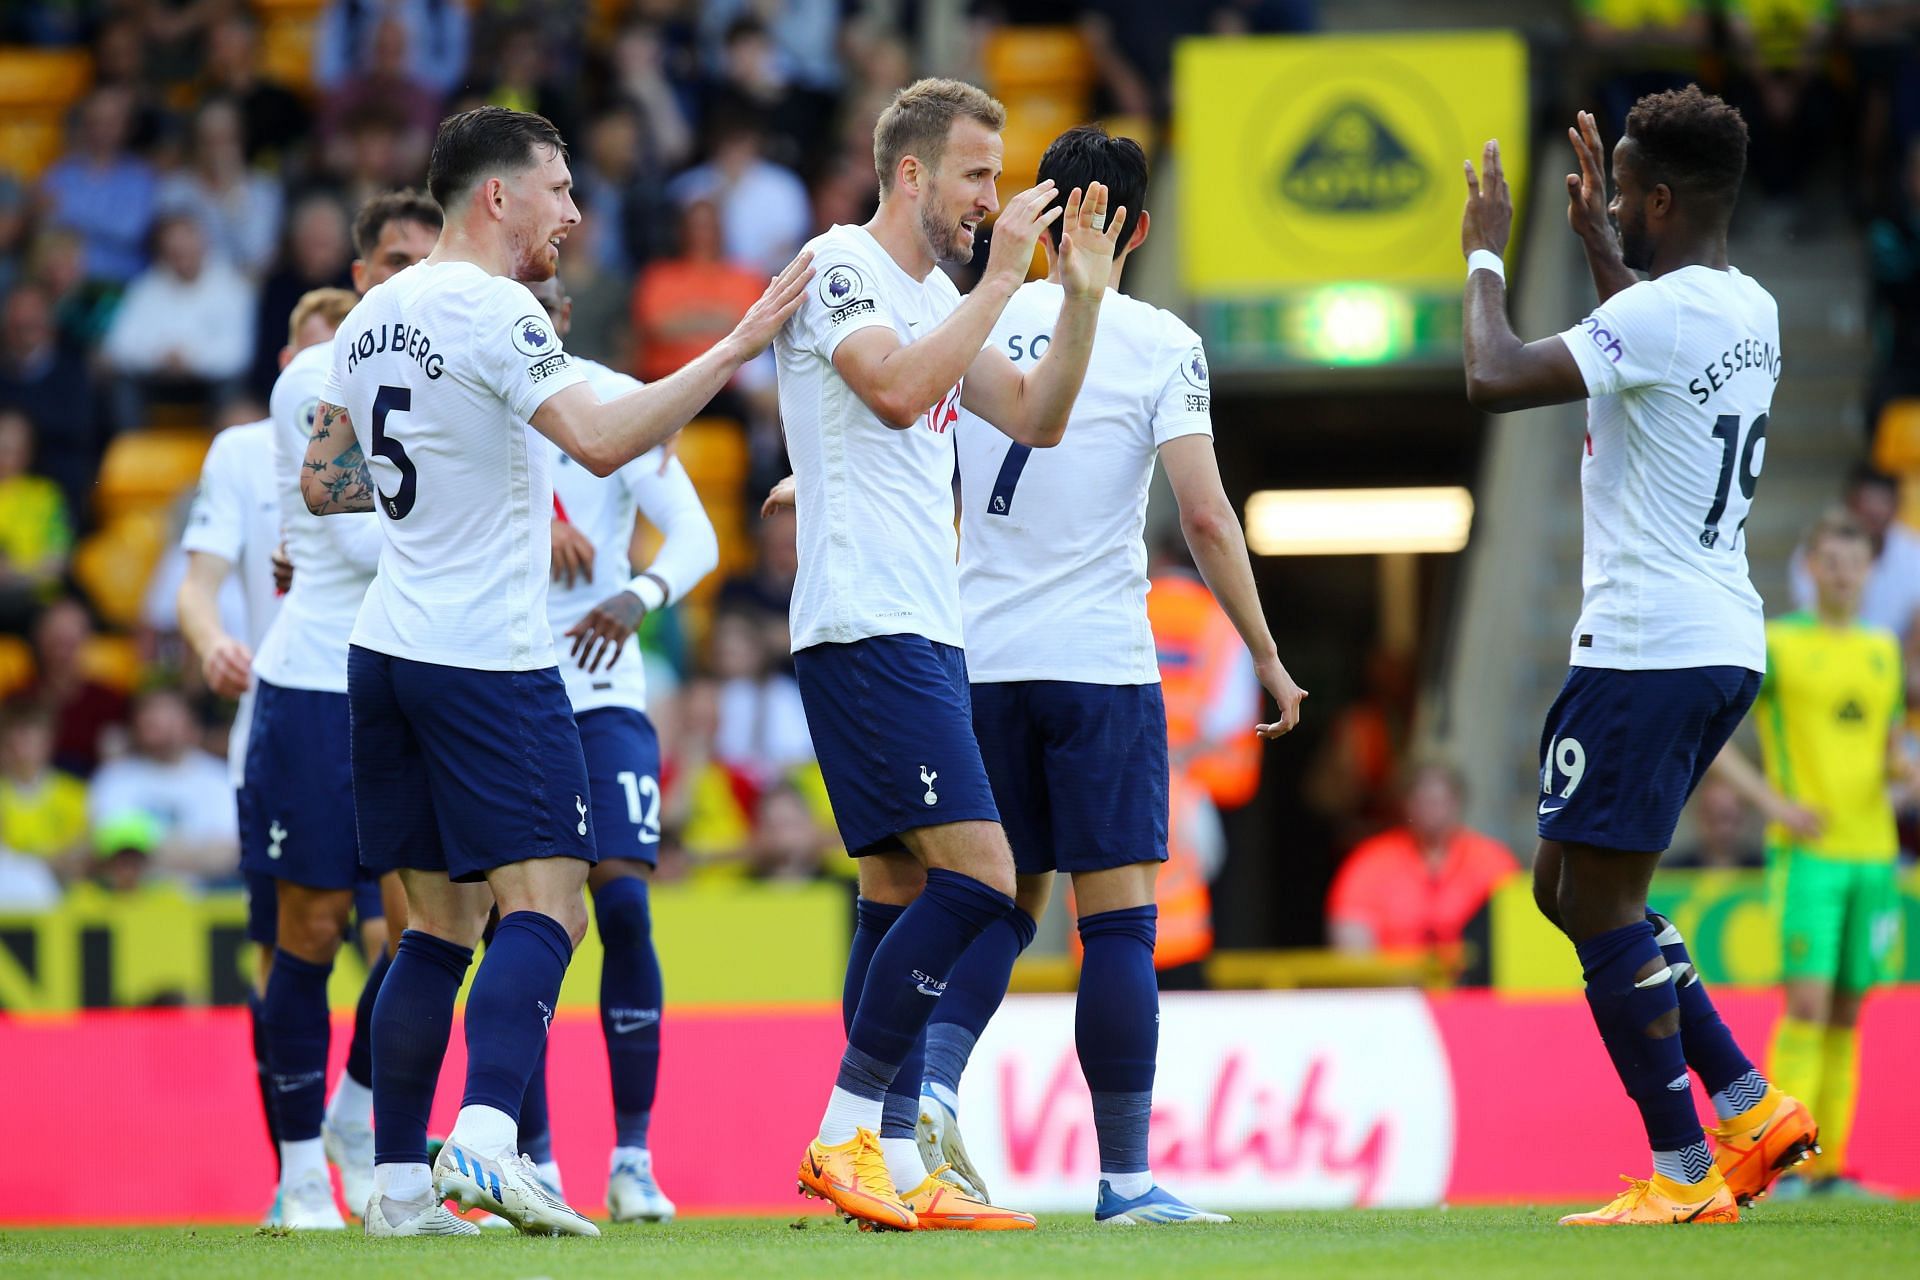 Tottenham secured top four spot on the last day of the season